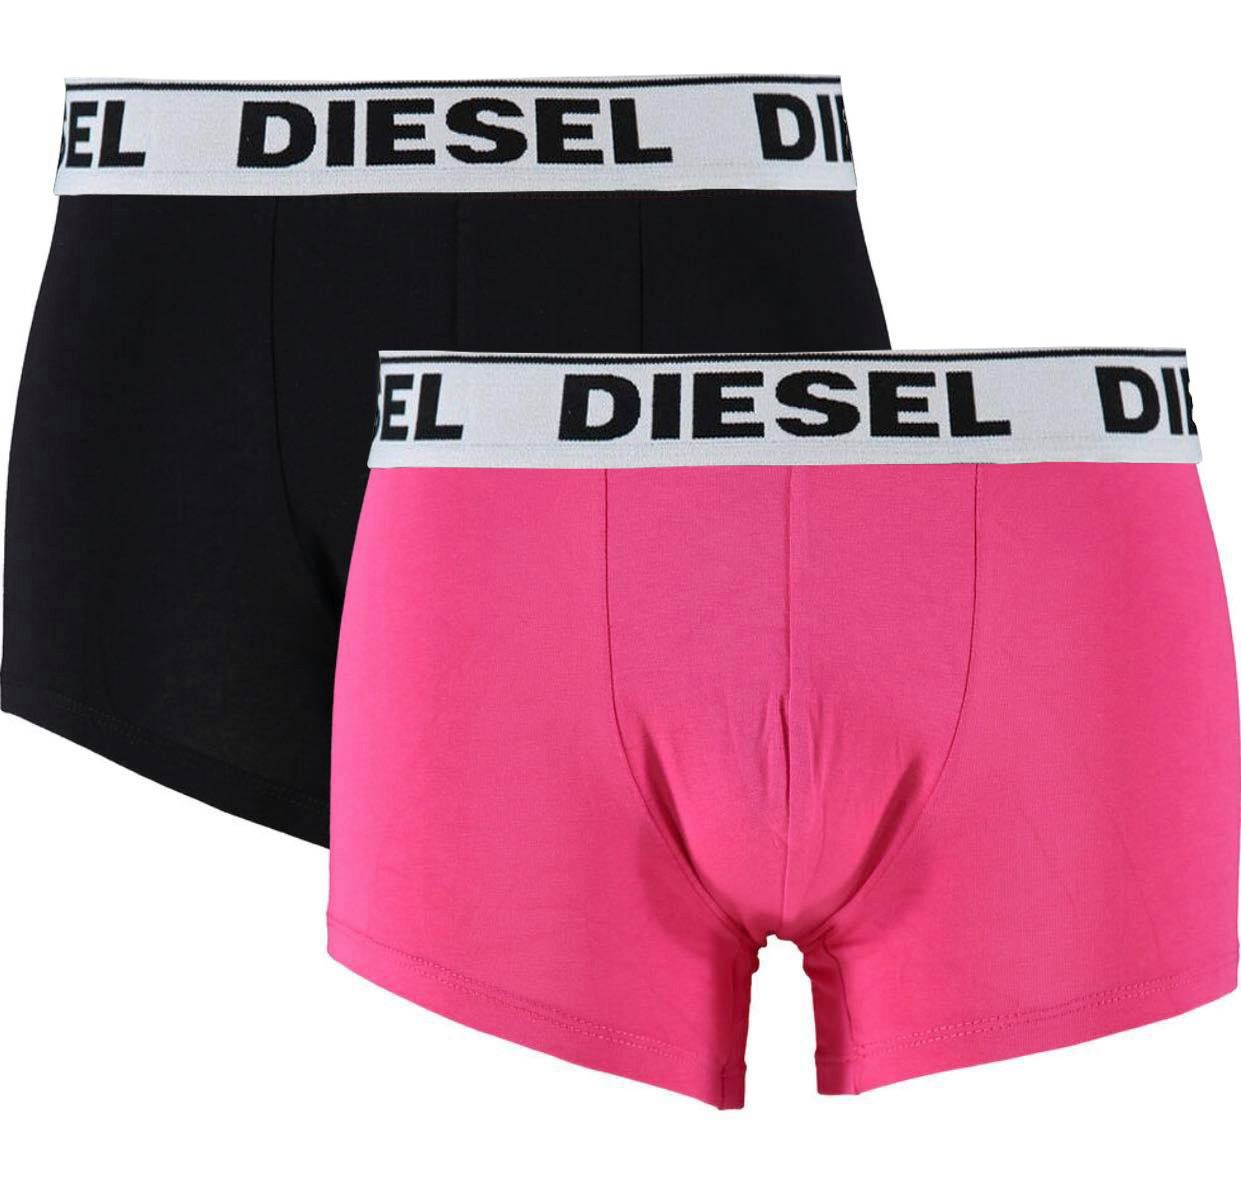 Diesel UMBX-KORY E4105 Boxer Shorts Two Pack. Diesel Mens Boxer Shorts 2 Pack. 95% Cotton 5% Elastane. Stretching Fit. Diesel Branding on Waistband. Style - UMBX-KORYTWOPACK RQARZ E1350